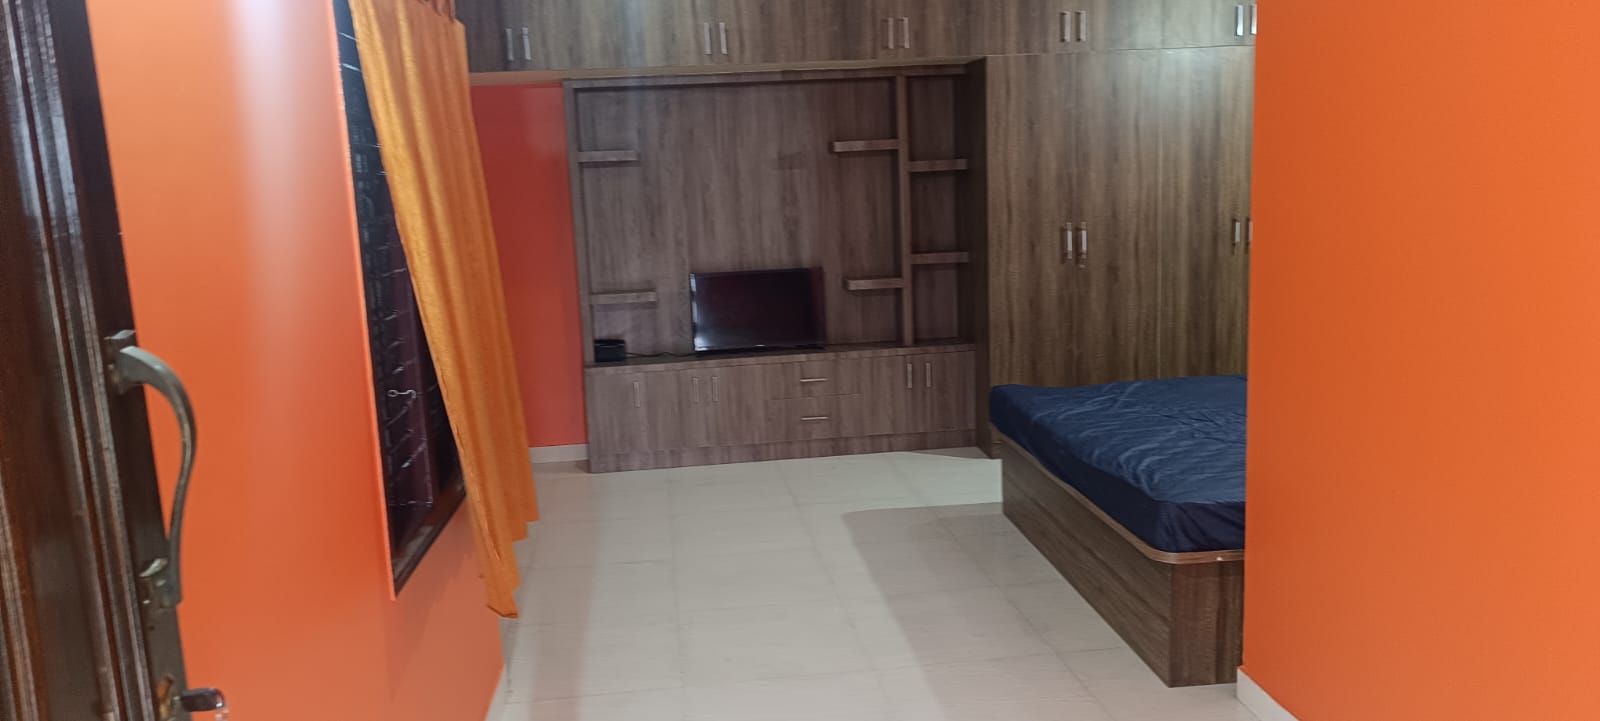 1 RK Residential Apartment for Rent in JP Nagar 5th Phase